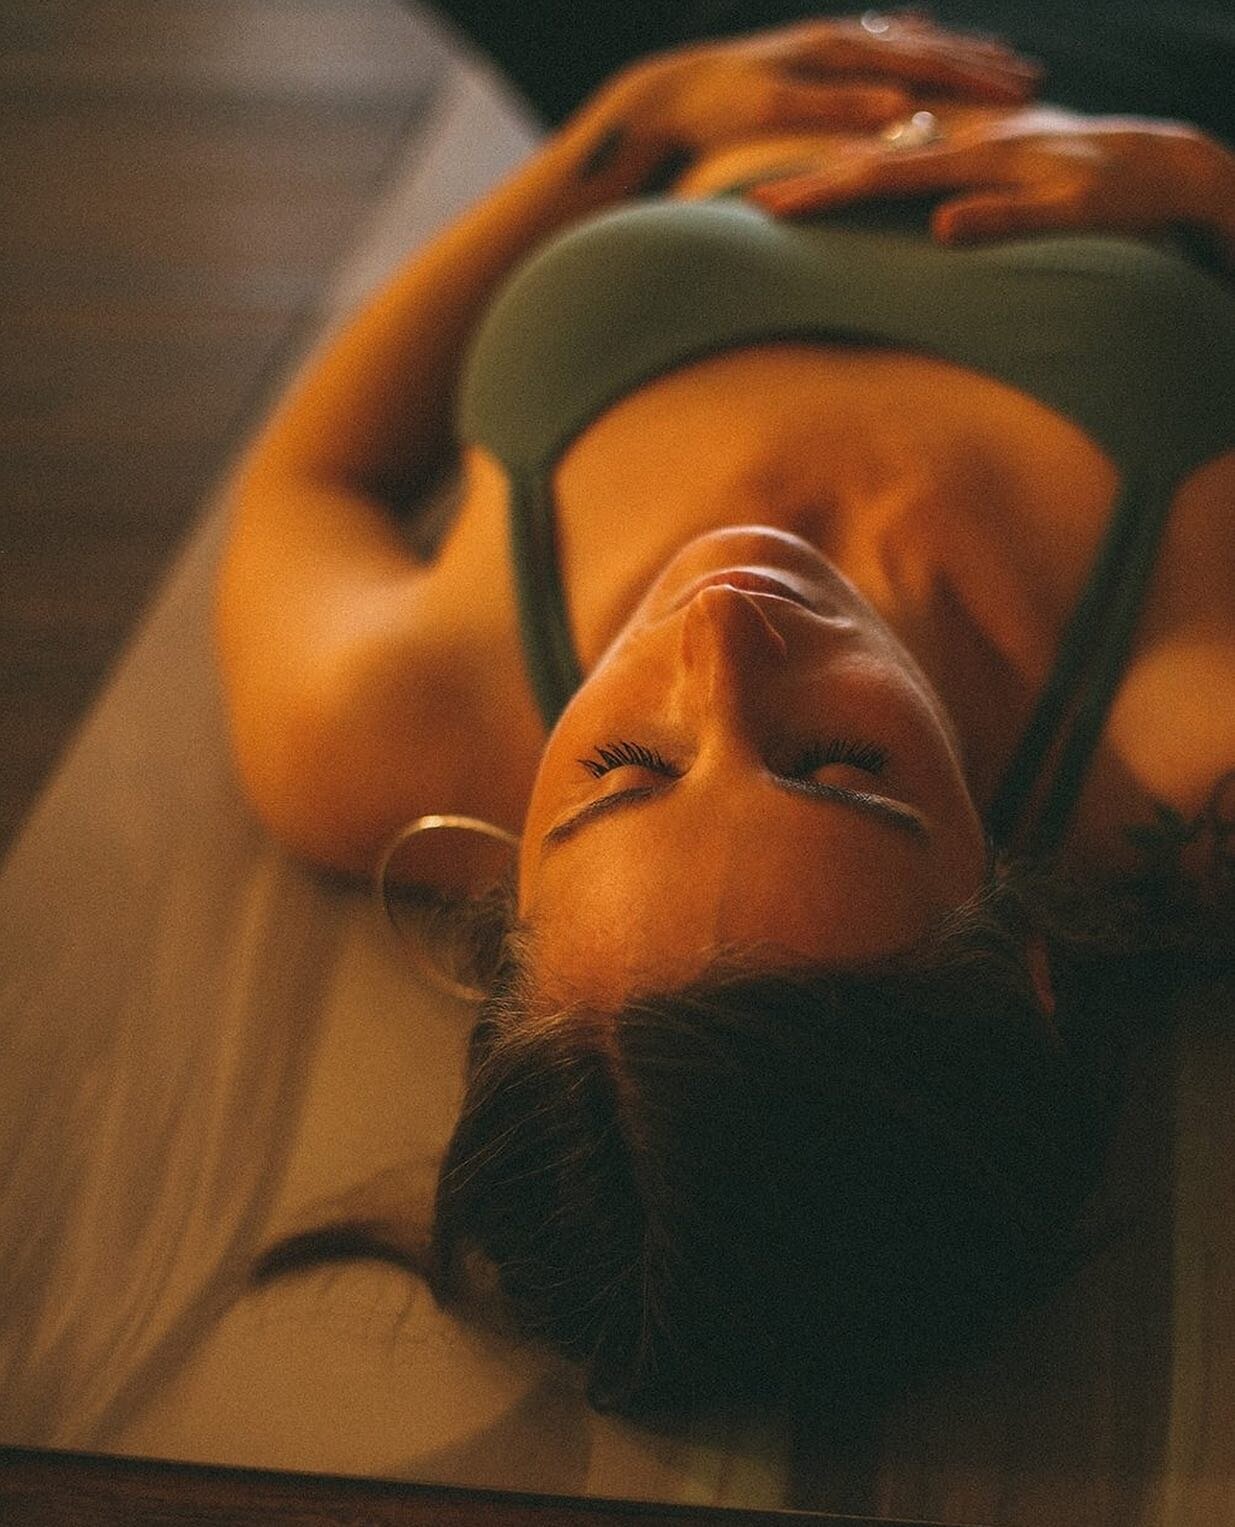 Have you ever experienced &ldquo;yogic sleep&rdquo; before?⁠ The relaxation practice of Yoga Nidra is just that.⁠
⁠
Join Sara this Friday to explore all the layers of consciousness, using mental images and sensation queues. ⁠
⁠
Want to add Yoga Nidra